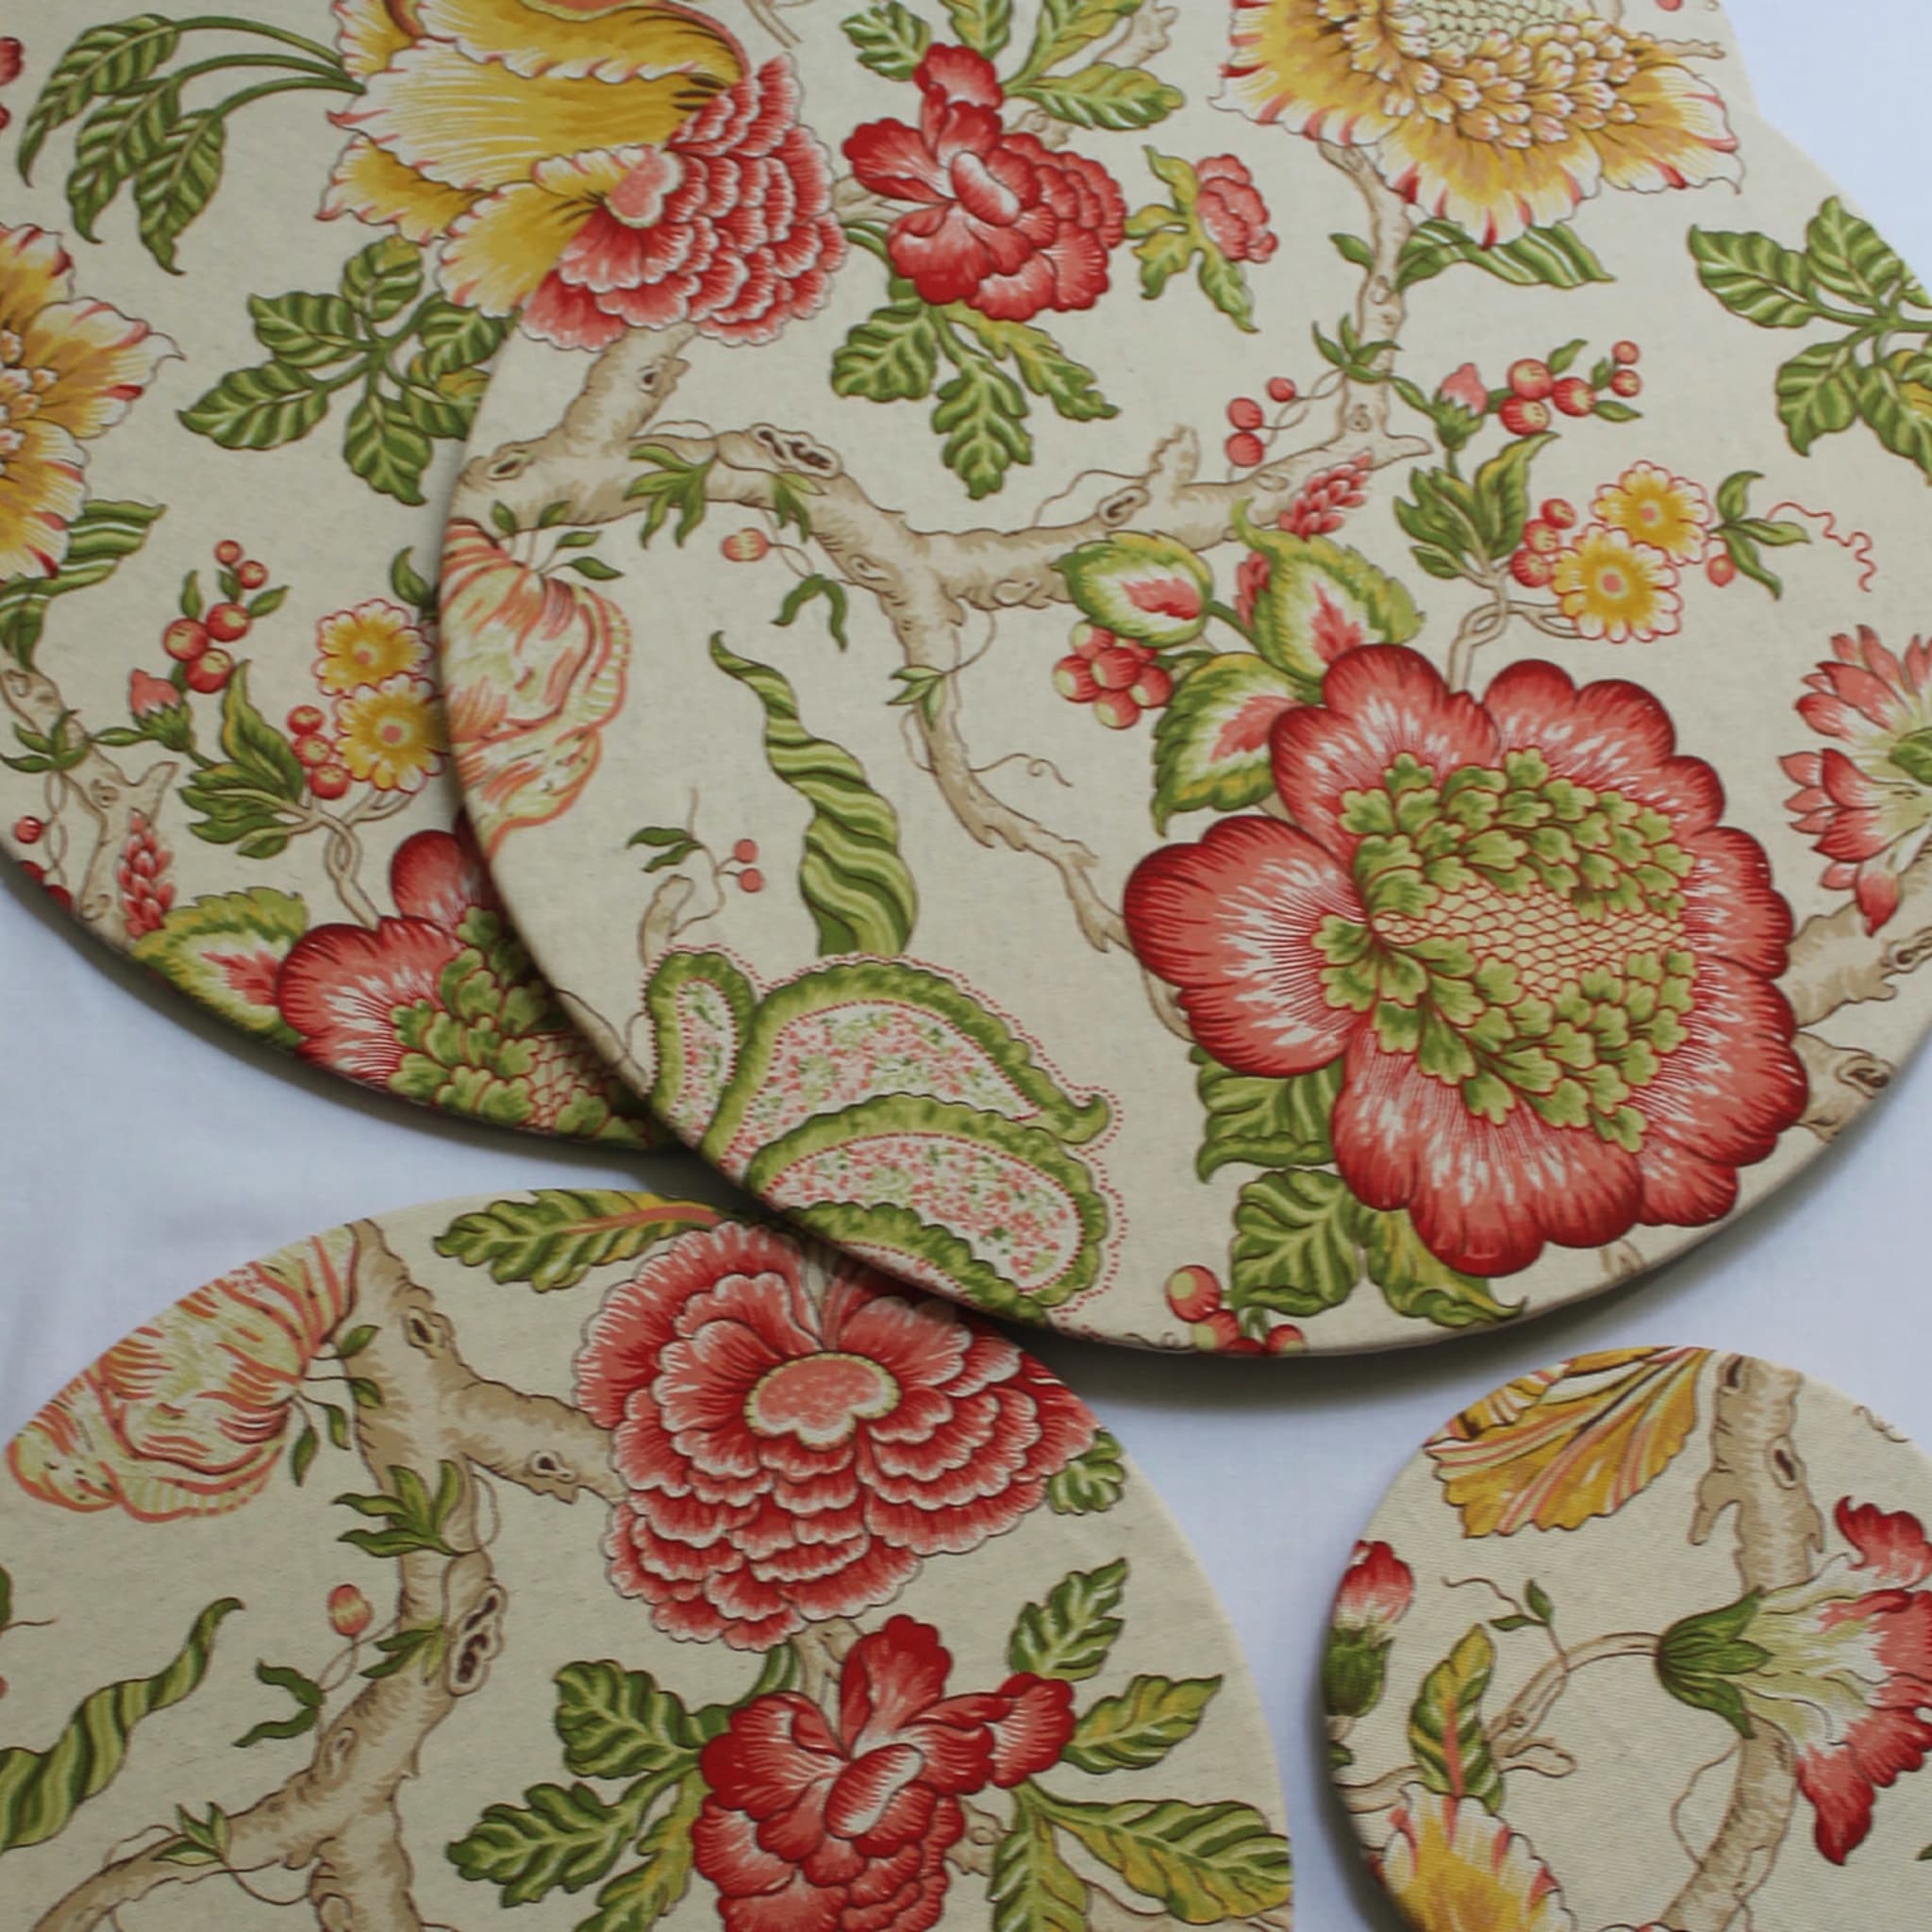 Set of 2 Cuffiette Extra-Small Round Floral Placemats #3 - Alternative view 1